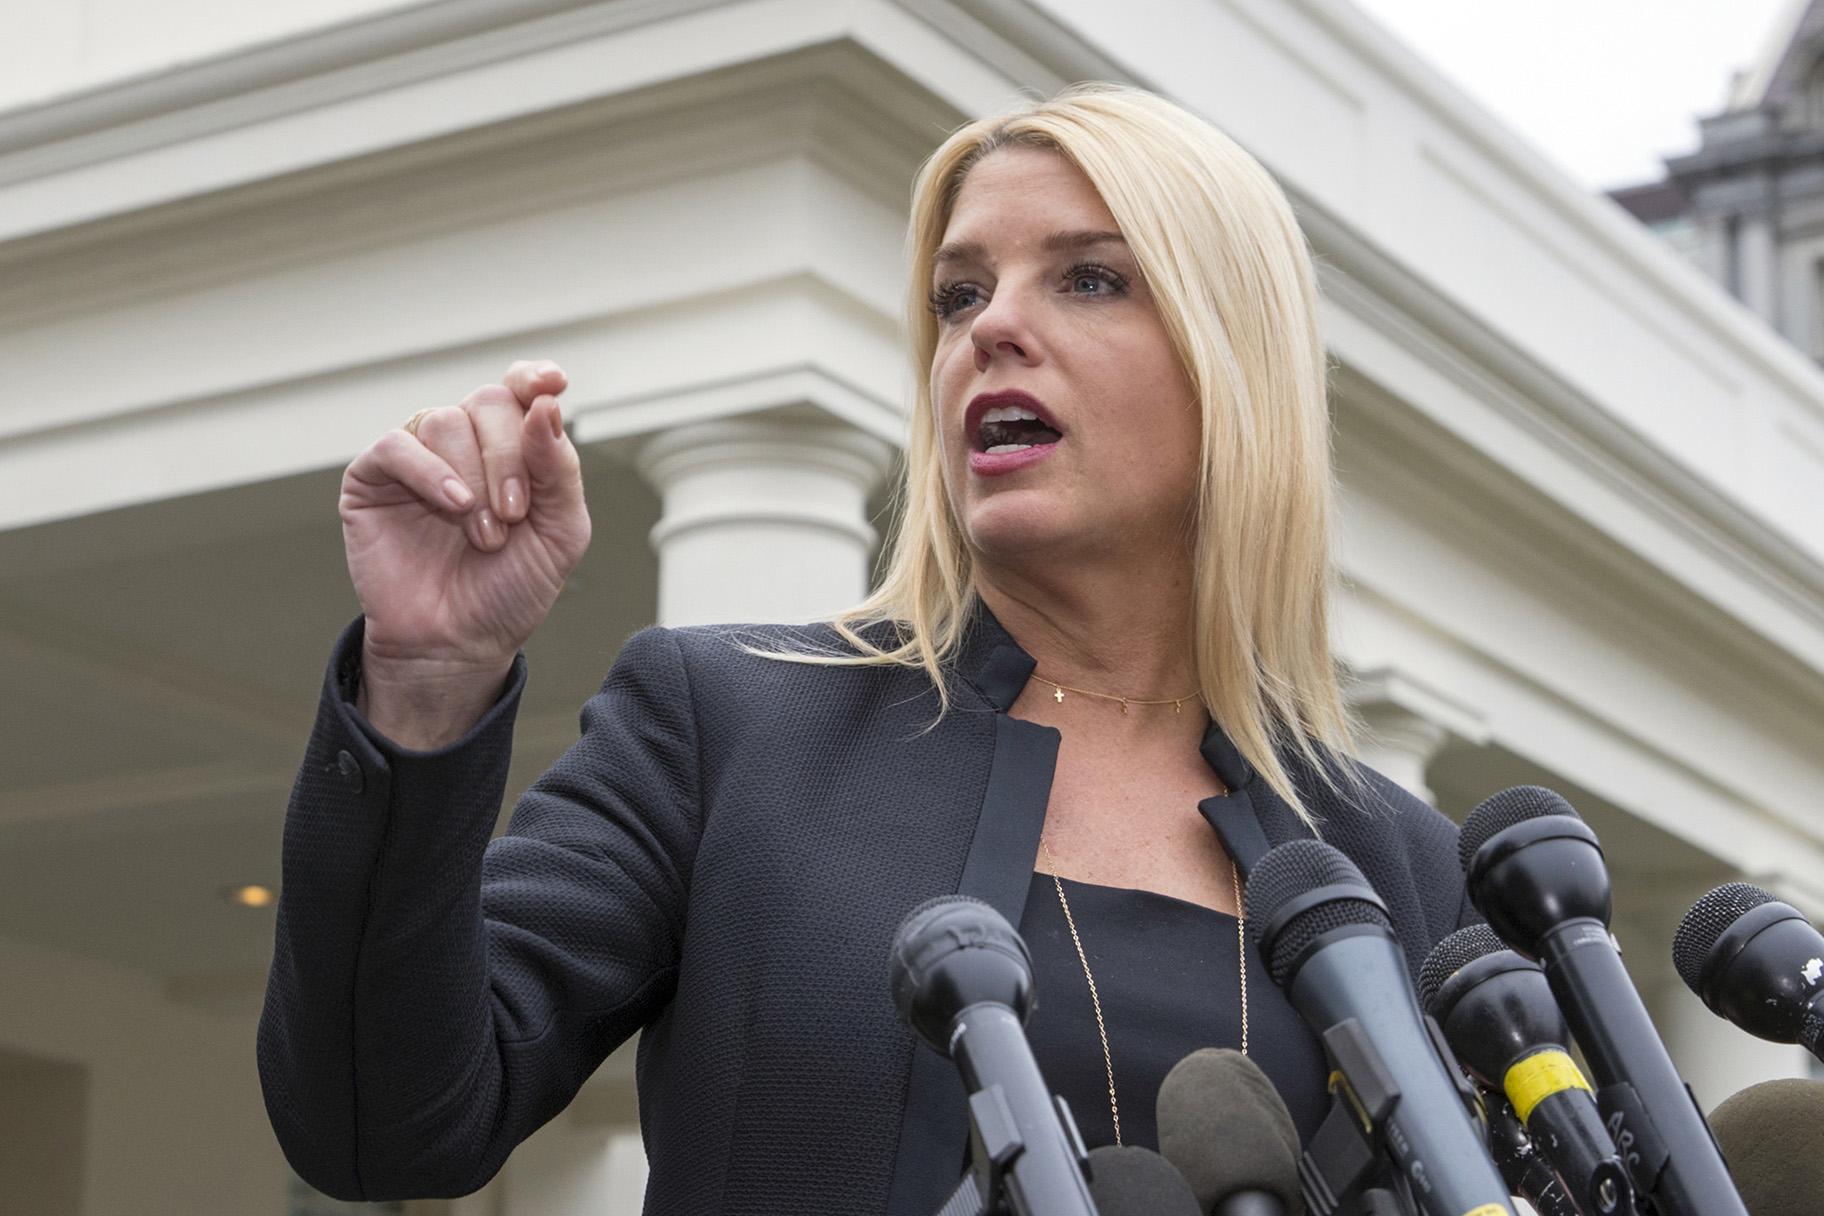 In this Feb. 22, 2018 file photo, Florida Attorney General Pam Bondi speaks to reporters outside the West Wing in Washington. (AP Photo / J. Scott Applewhite)